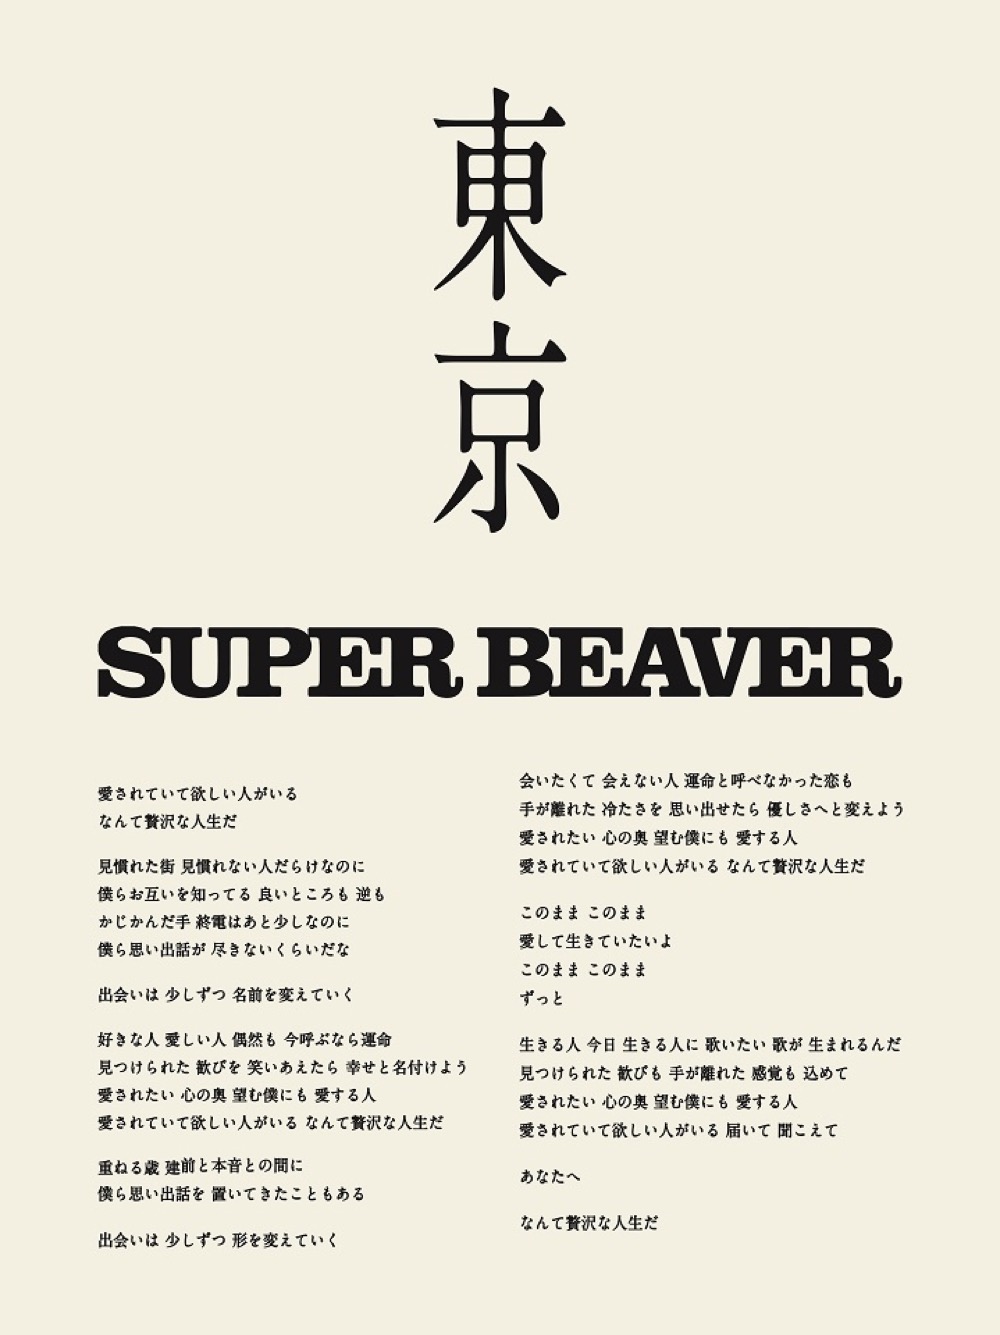 SUPER BEAVER feat. 長屋晴子、「東京」THE FIRST TAKEバージョンの配信がスタート - 画像一覧（1/3）